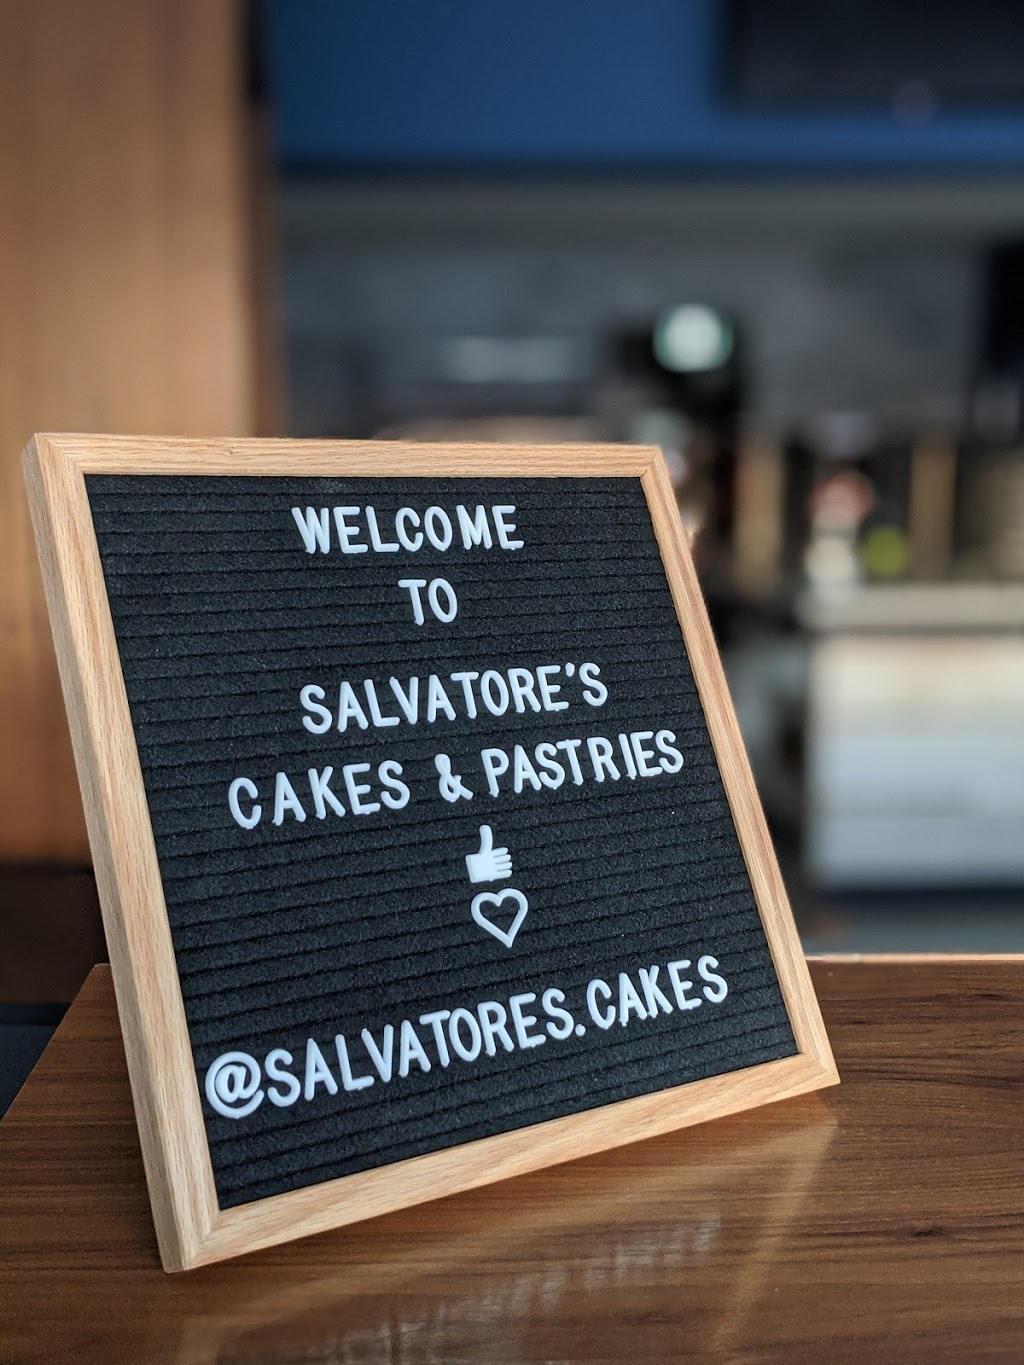 Salvatores Cakes & pastries | bakery | 9 Queen St N, Tottenham, ON L0G 1W0, Canada | 9054061010 OR +1 905-406-1010